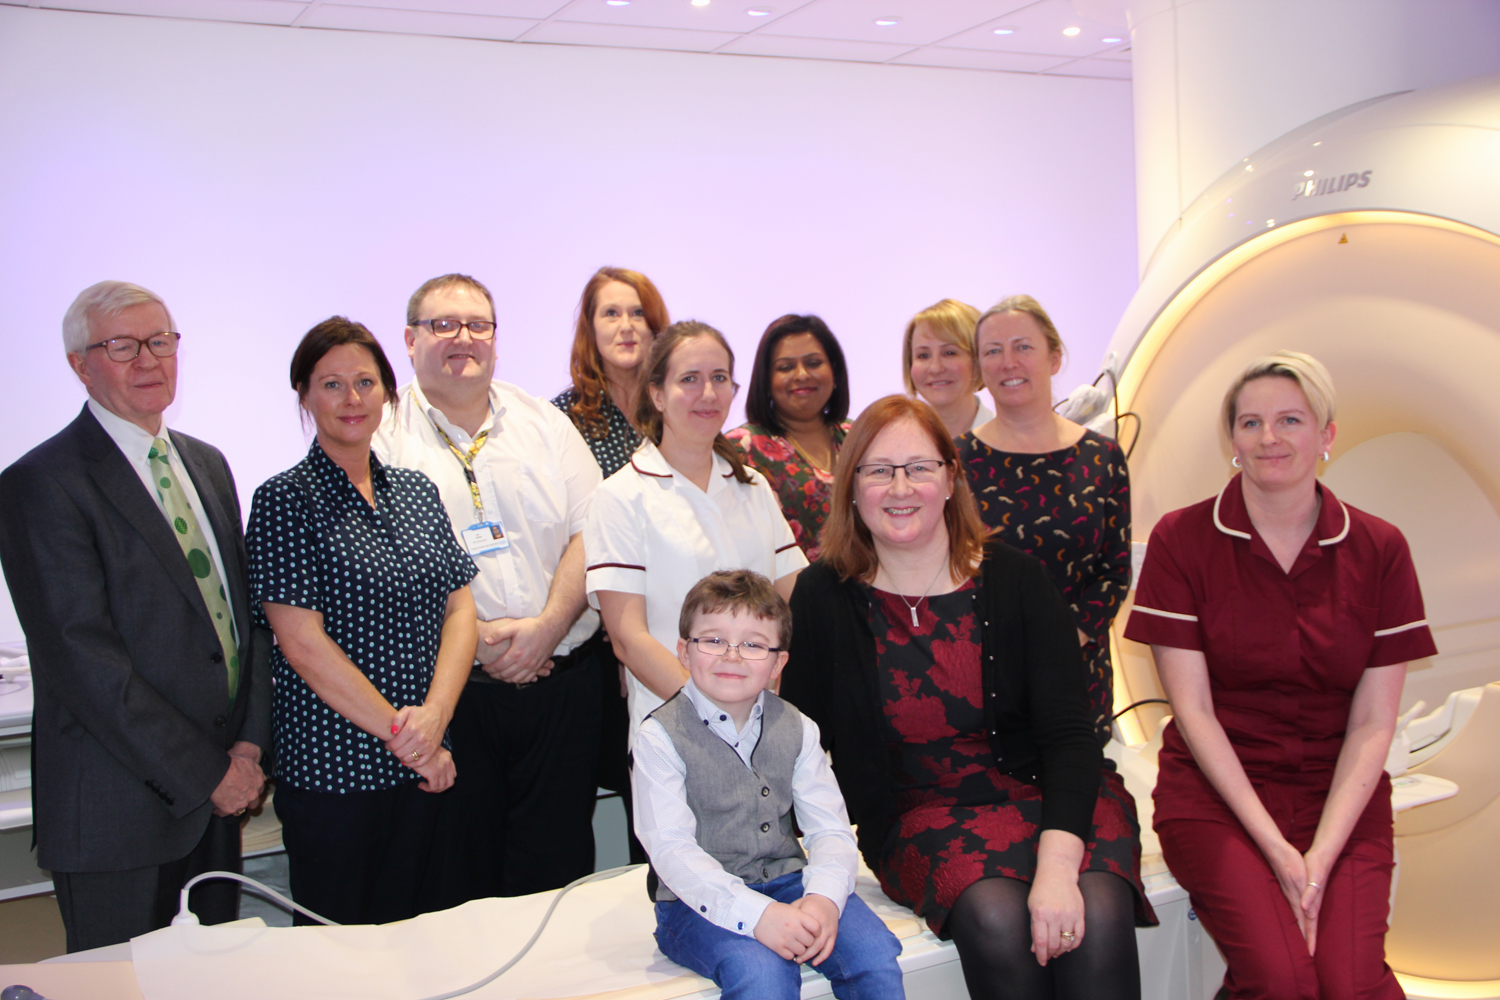 New MRI Scanner Installed Thanks to Generous Donations